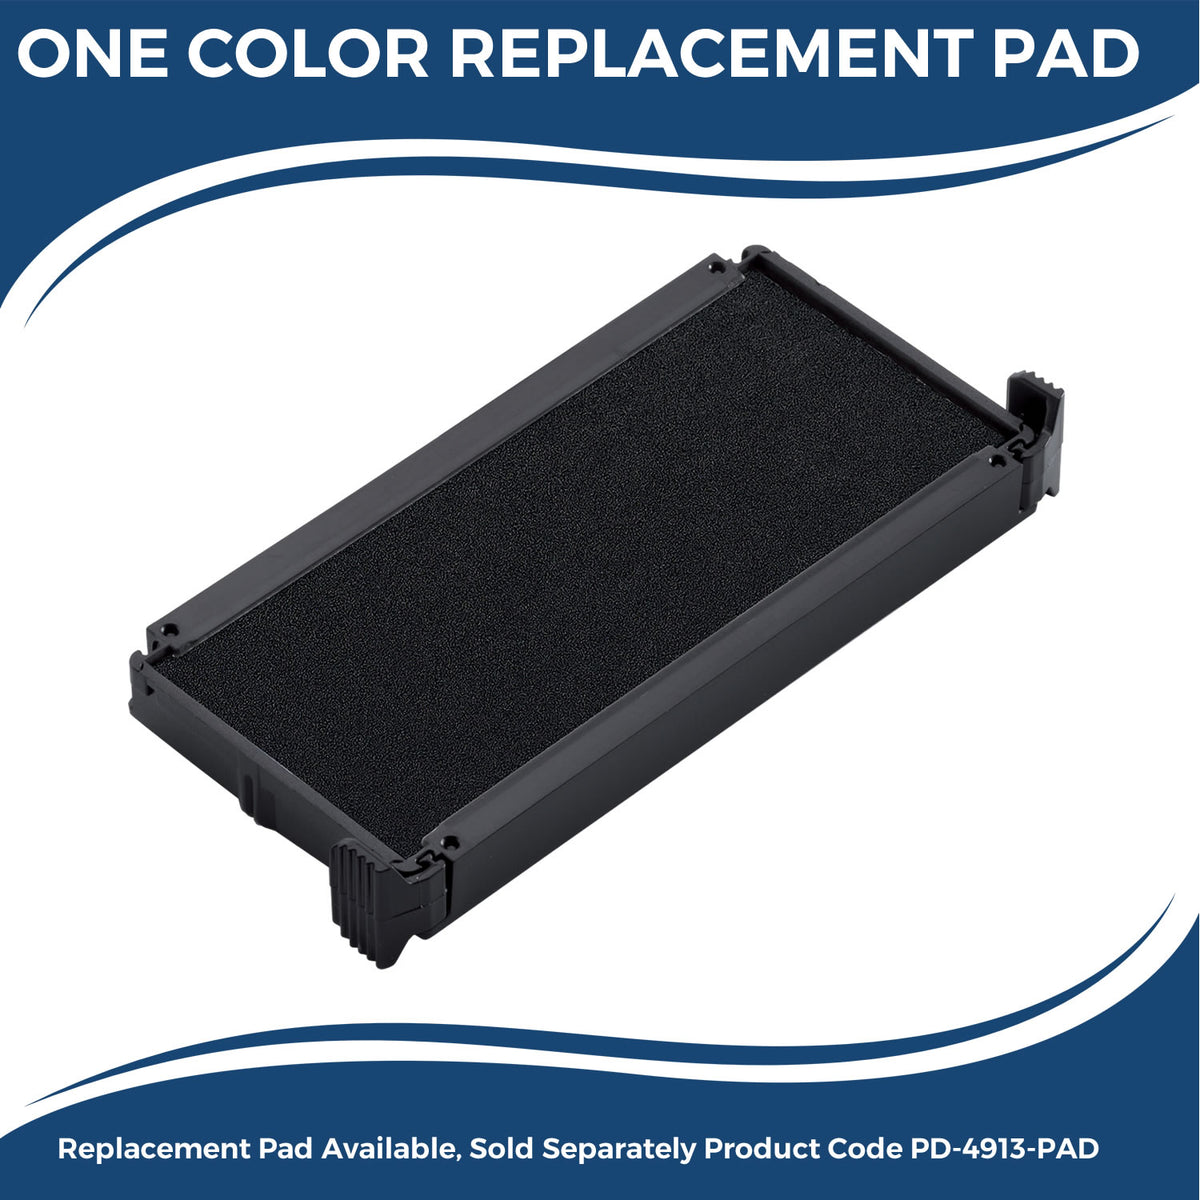 Large Self-Inking Revisado Stamp 5543S Large Replacment Pad